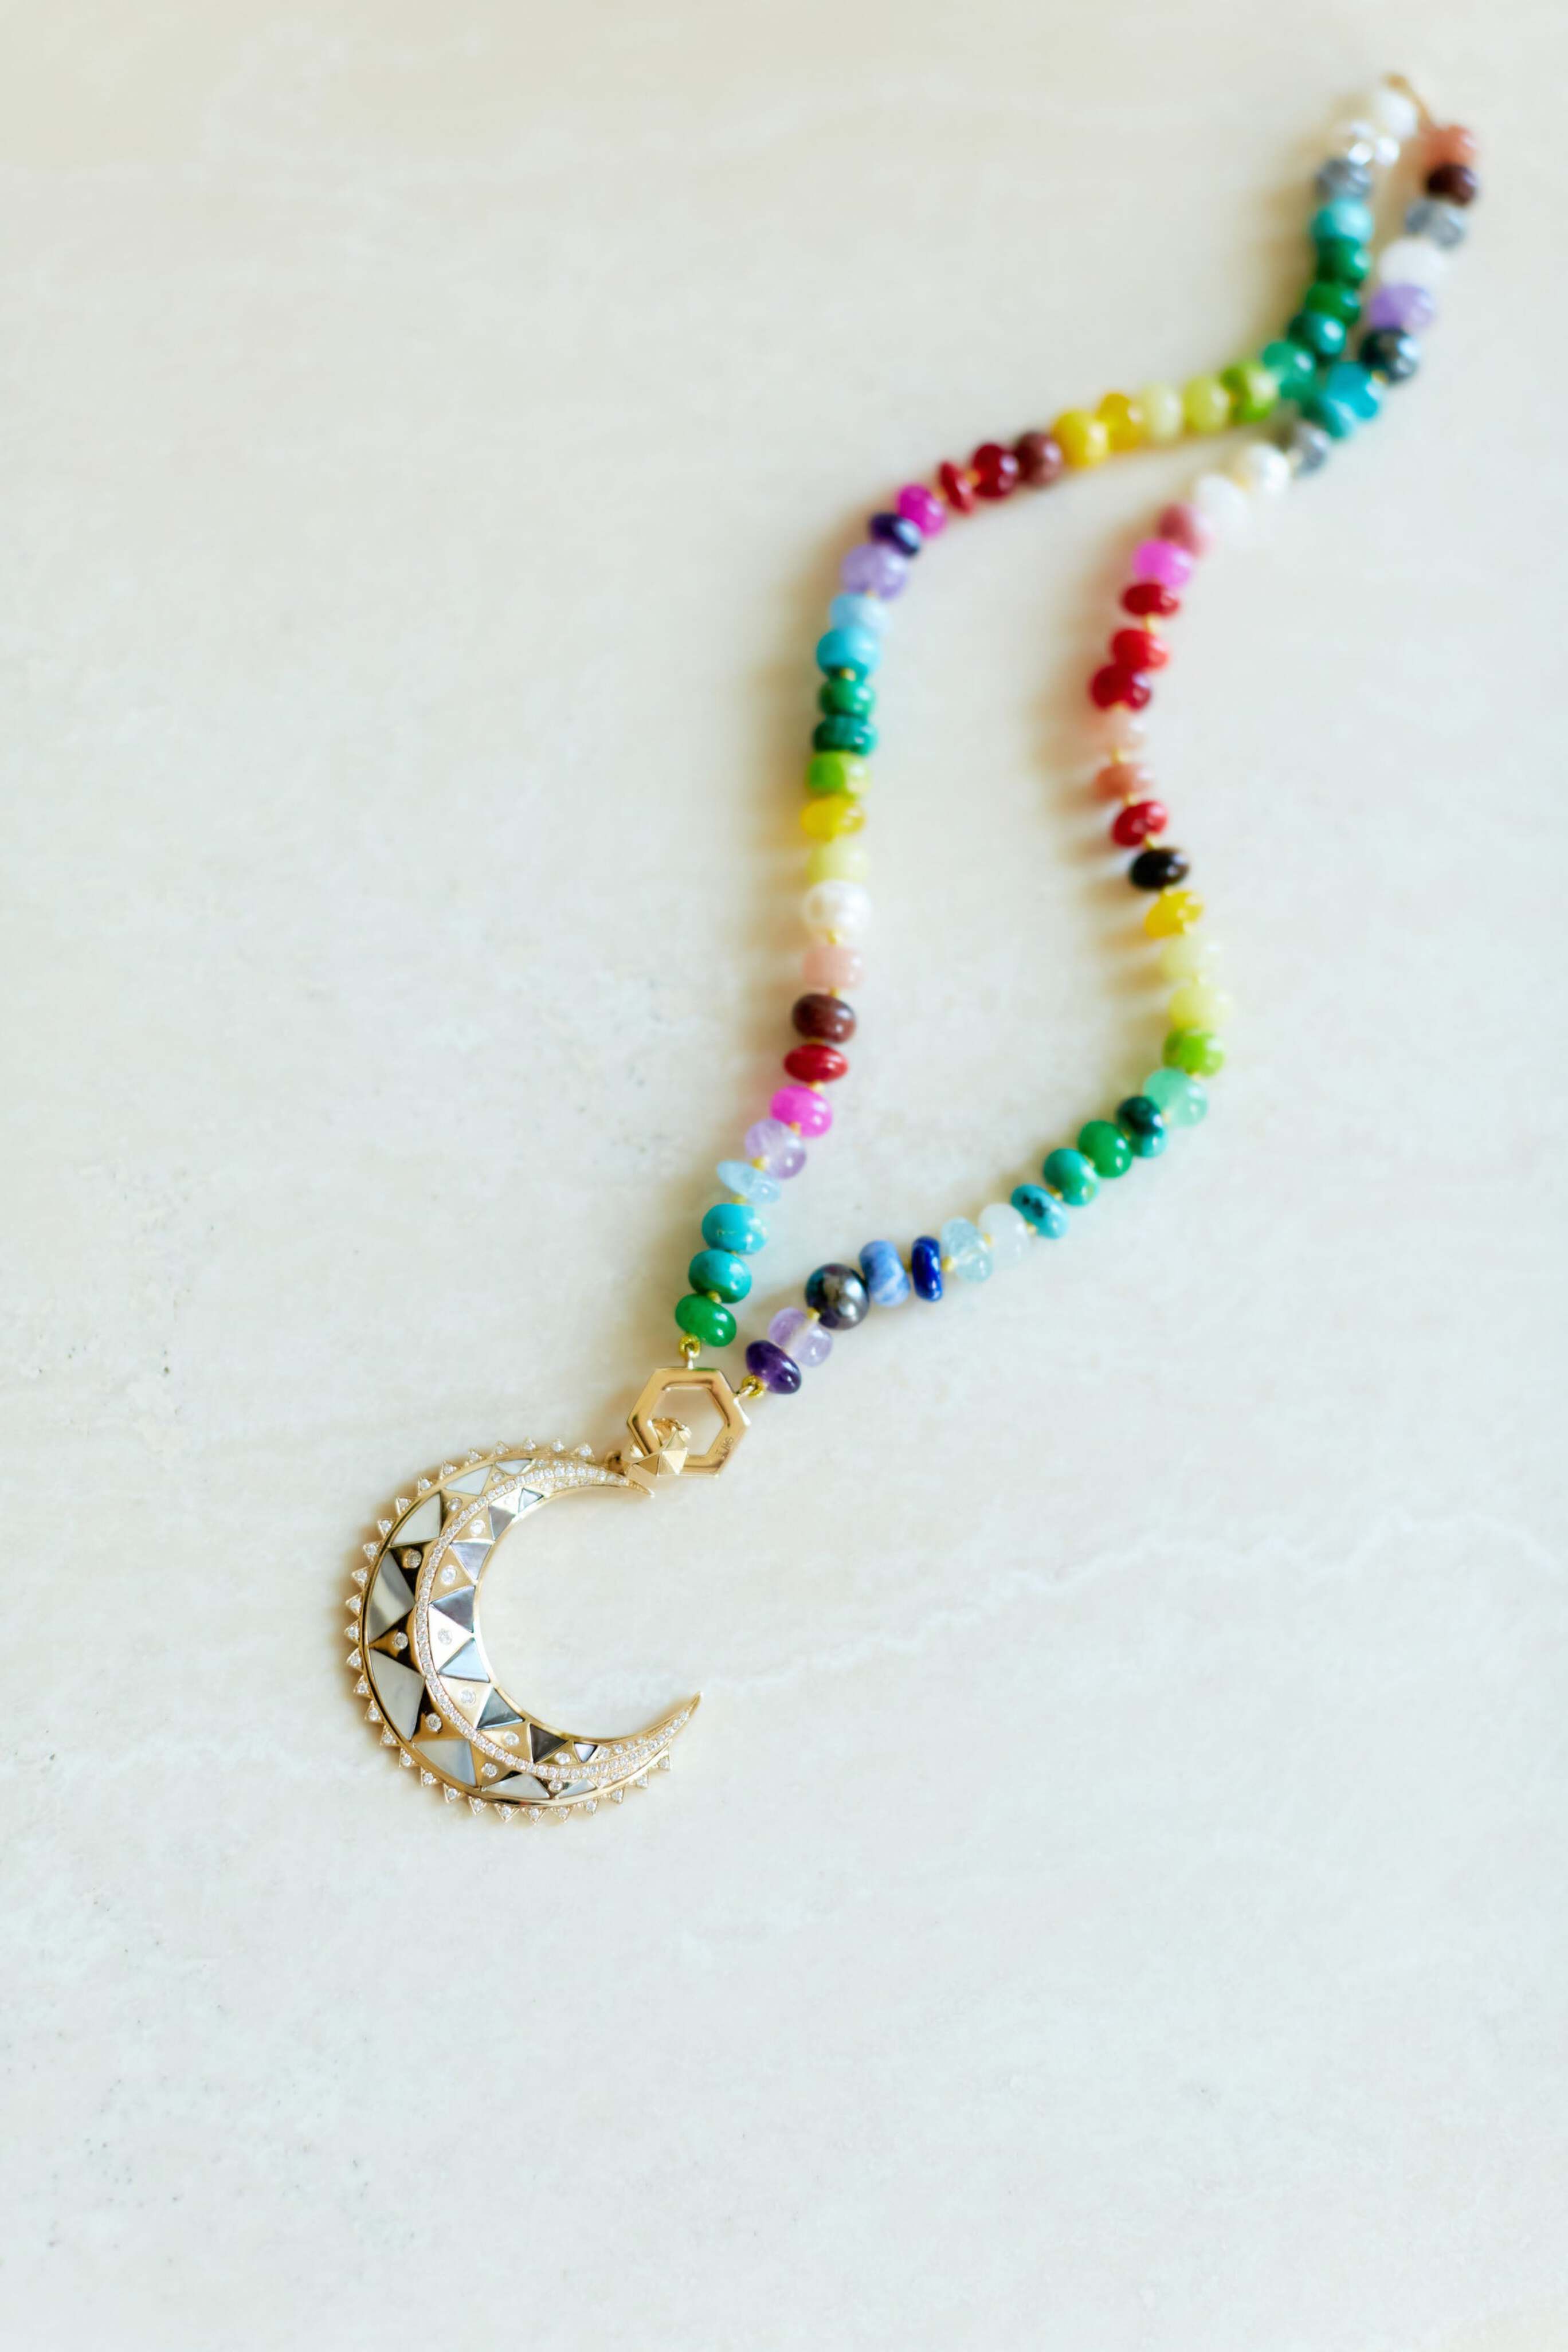 Rainbow Gemstone Beaded Necklace – The Golden Cleat